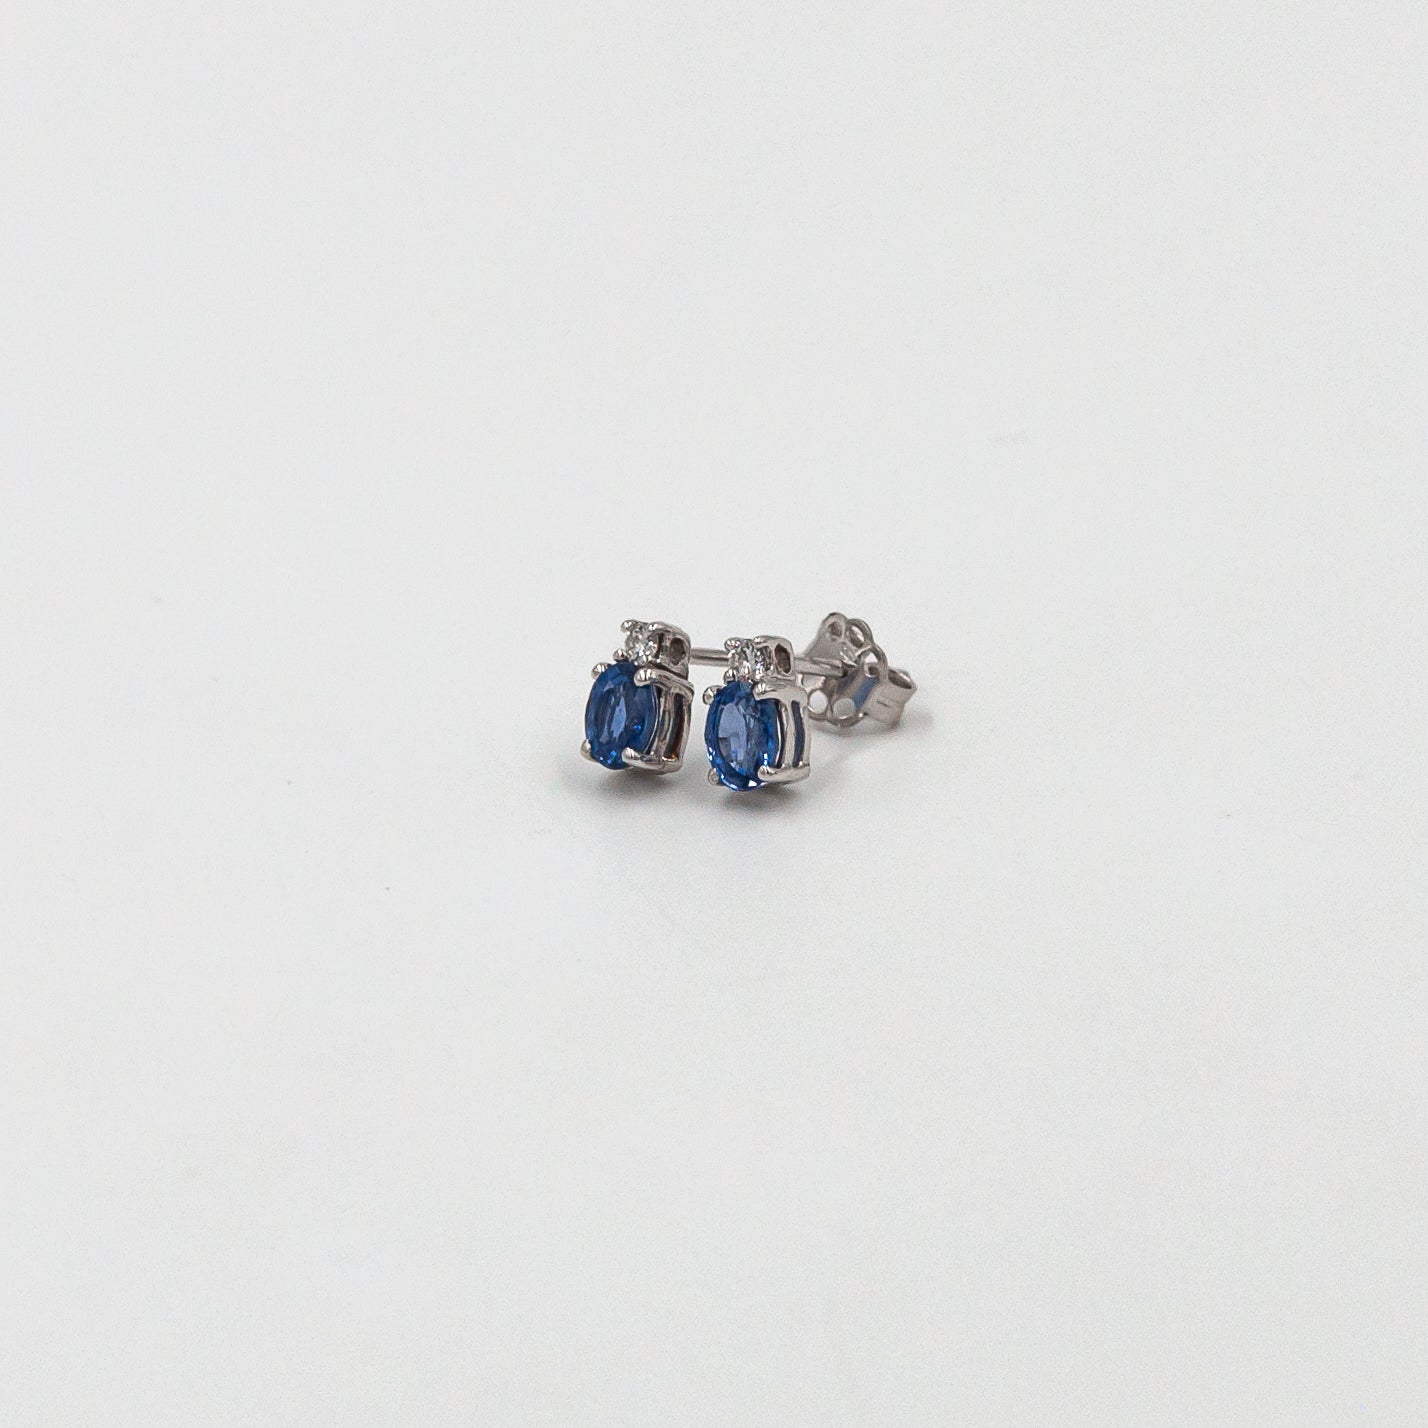 Droplets earrings with Sapphires and Diamonds